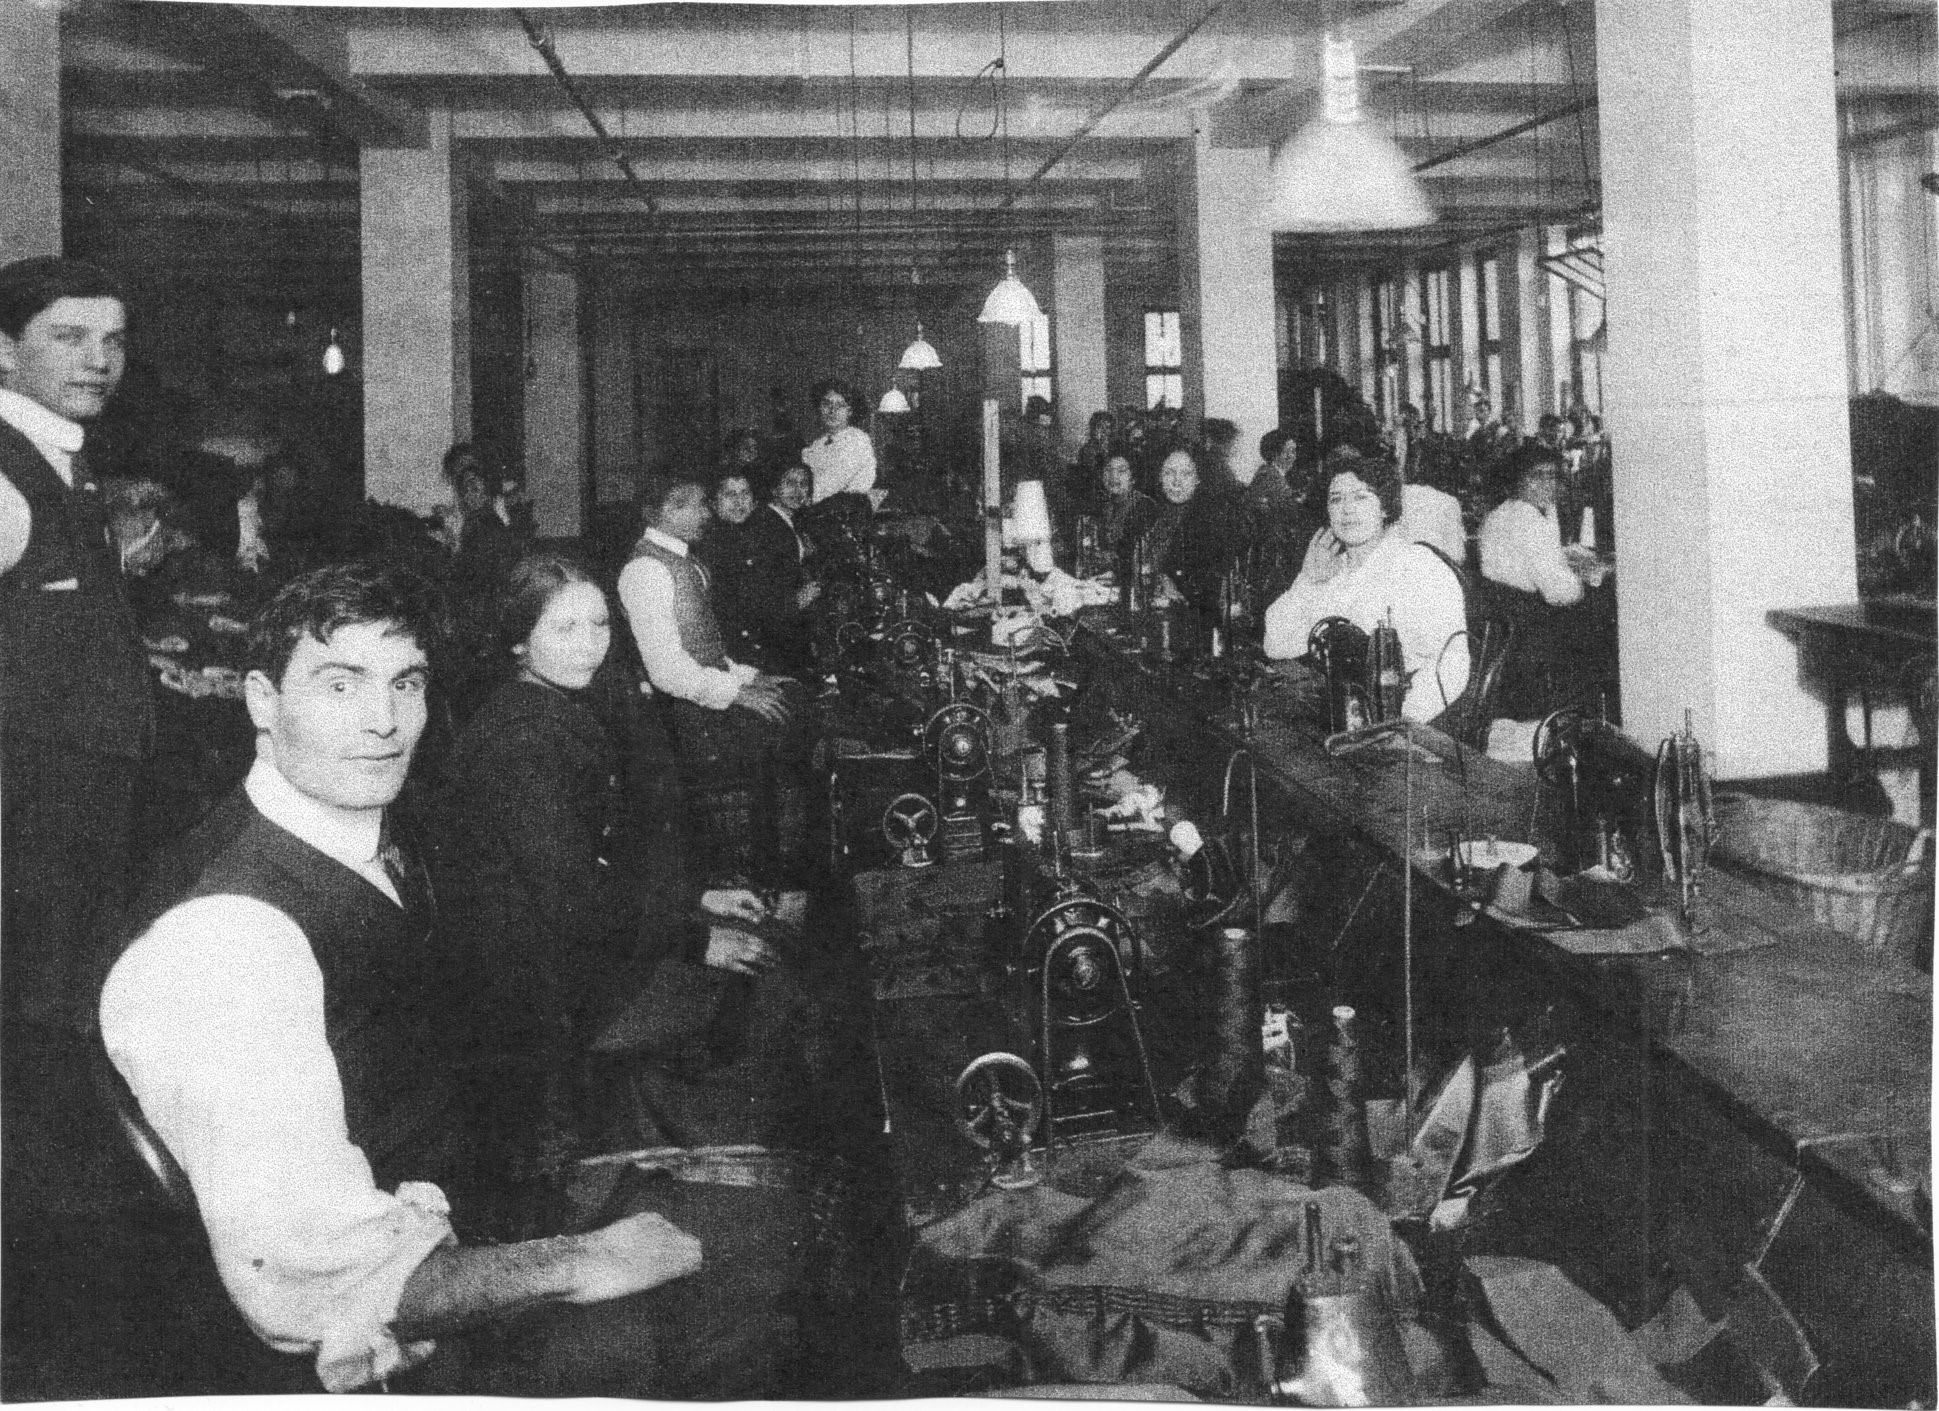 Photo description: Men and women working at the Triangle Shirtwaist Factory, some are standing and some are seated. Most are looking toward the camera. There are eight people seated at either side of a long table that's set up for tactile factory work – in front of each seated person is a sewing machine. In the foreground on the left is a seated man with short dark hair, he's wearing a button-up vest with a white button down shirt with the sleeves rolled up. To his left is a young woman, also seated, in a dark coat and long skirt, her hair is tied back in a low bun. In the midground, on the right side of the photo, is a young woman in a white shirt. She is seated and facing the camera, her right arm is propped up on the table and her right hand is touching her face. She has short, curly hair. This is the author, Marissa Ditowsky's, great grandmother.